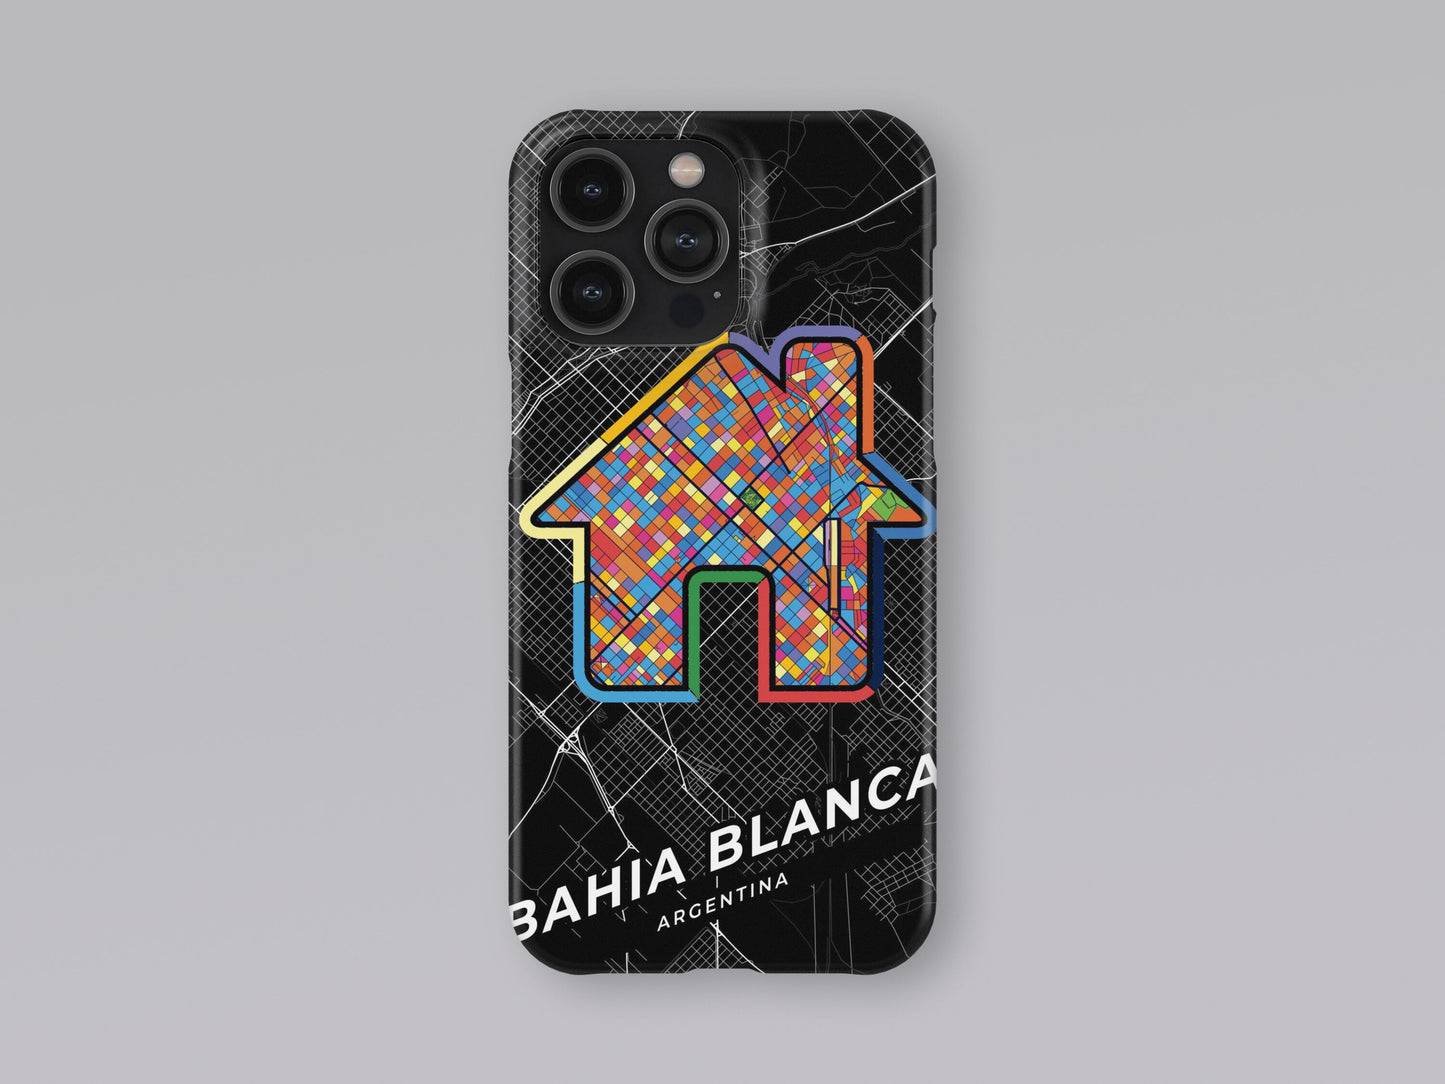 Bahia Blanca Argentina slim phone case with colorful icon. Birthday, wedding or housewarming gift. Couple match cases. 3